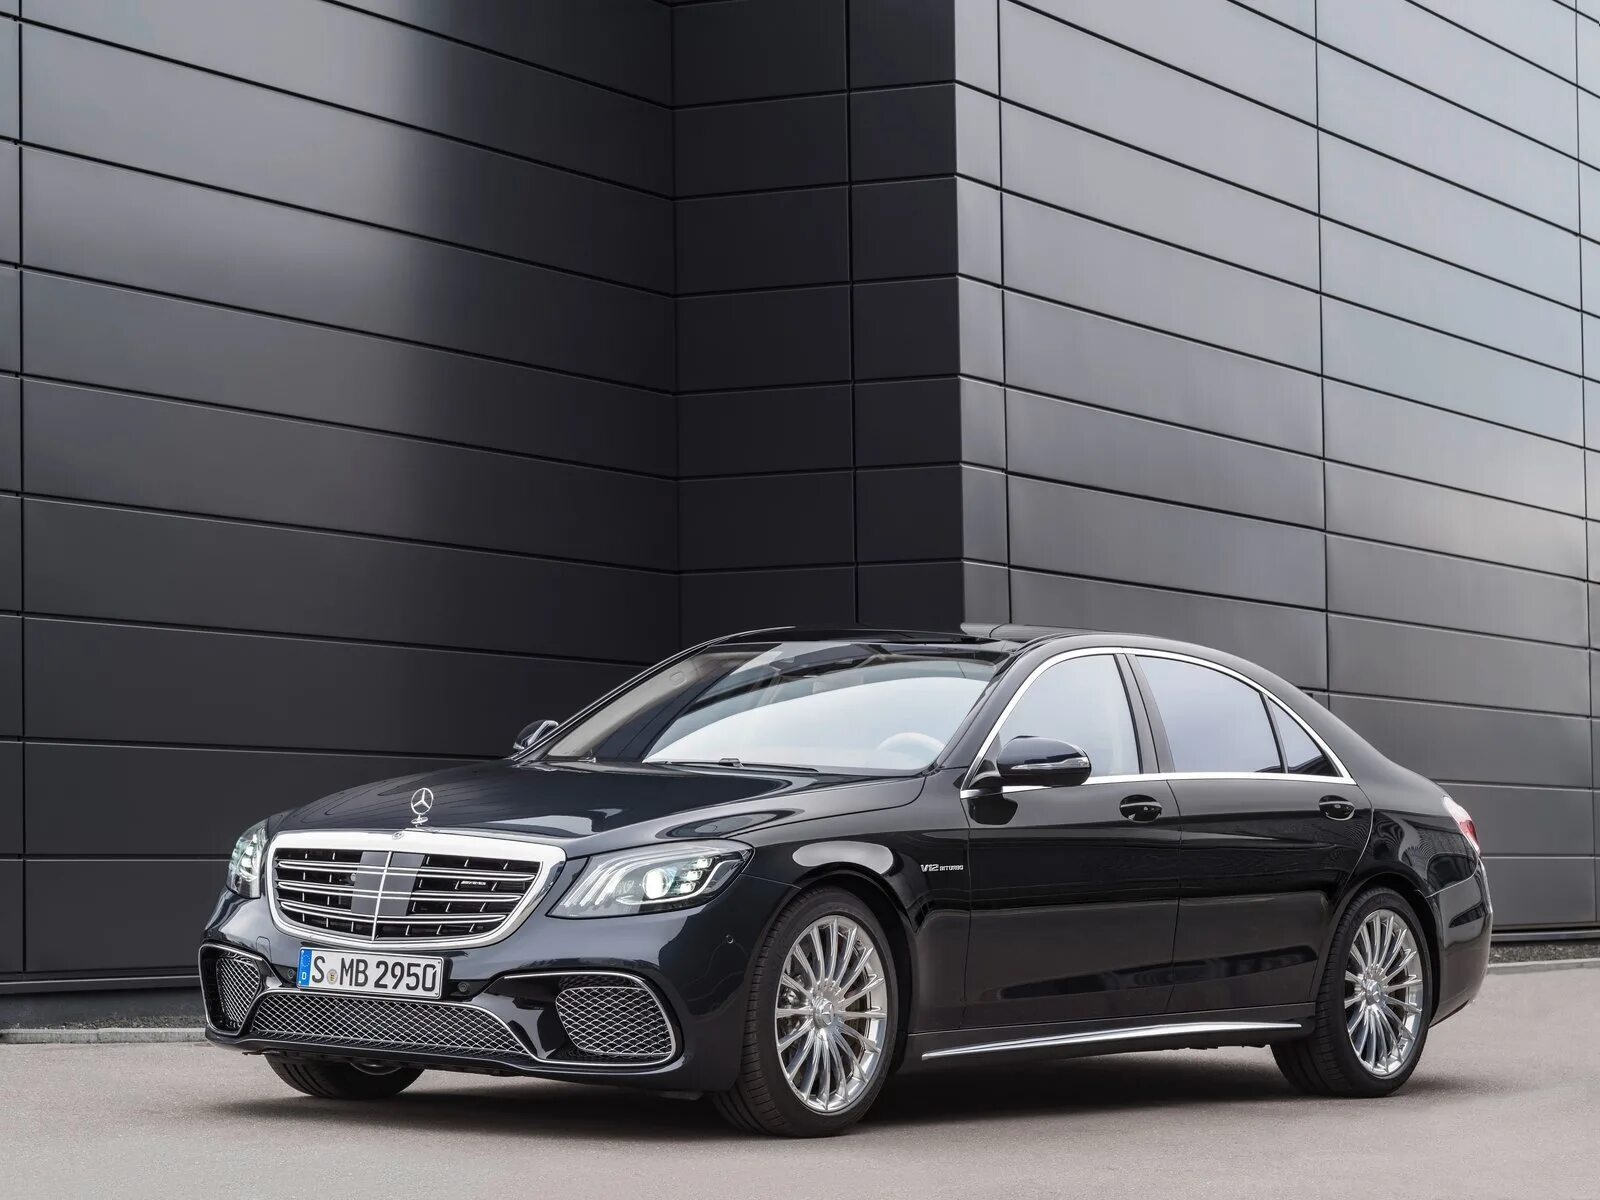 Mercedes Benz s 65 AMG. Мерседес Бенц s65 AMG. Mercedes Benz s65 AMG w222. Мерседес s AMG s65.